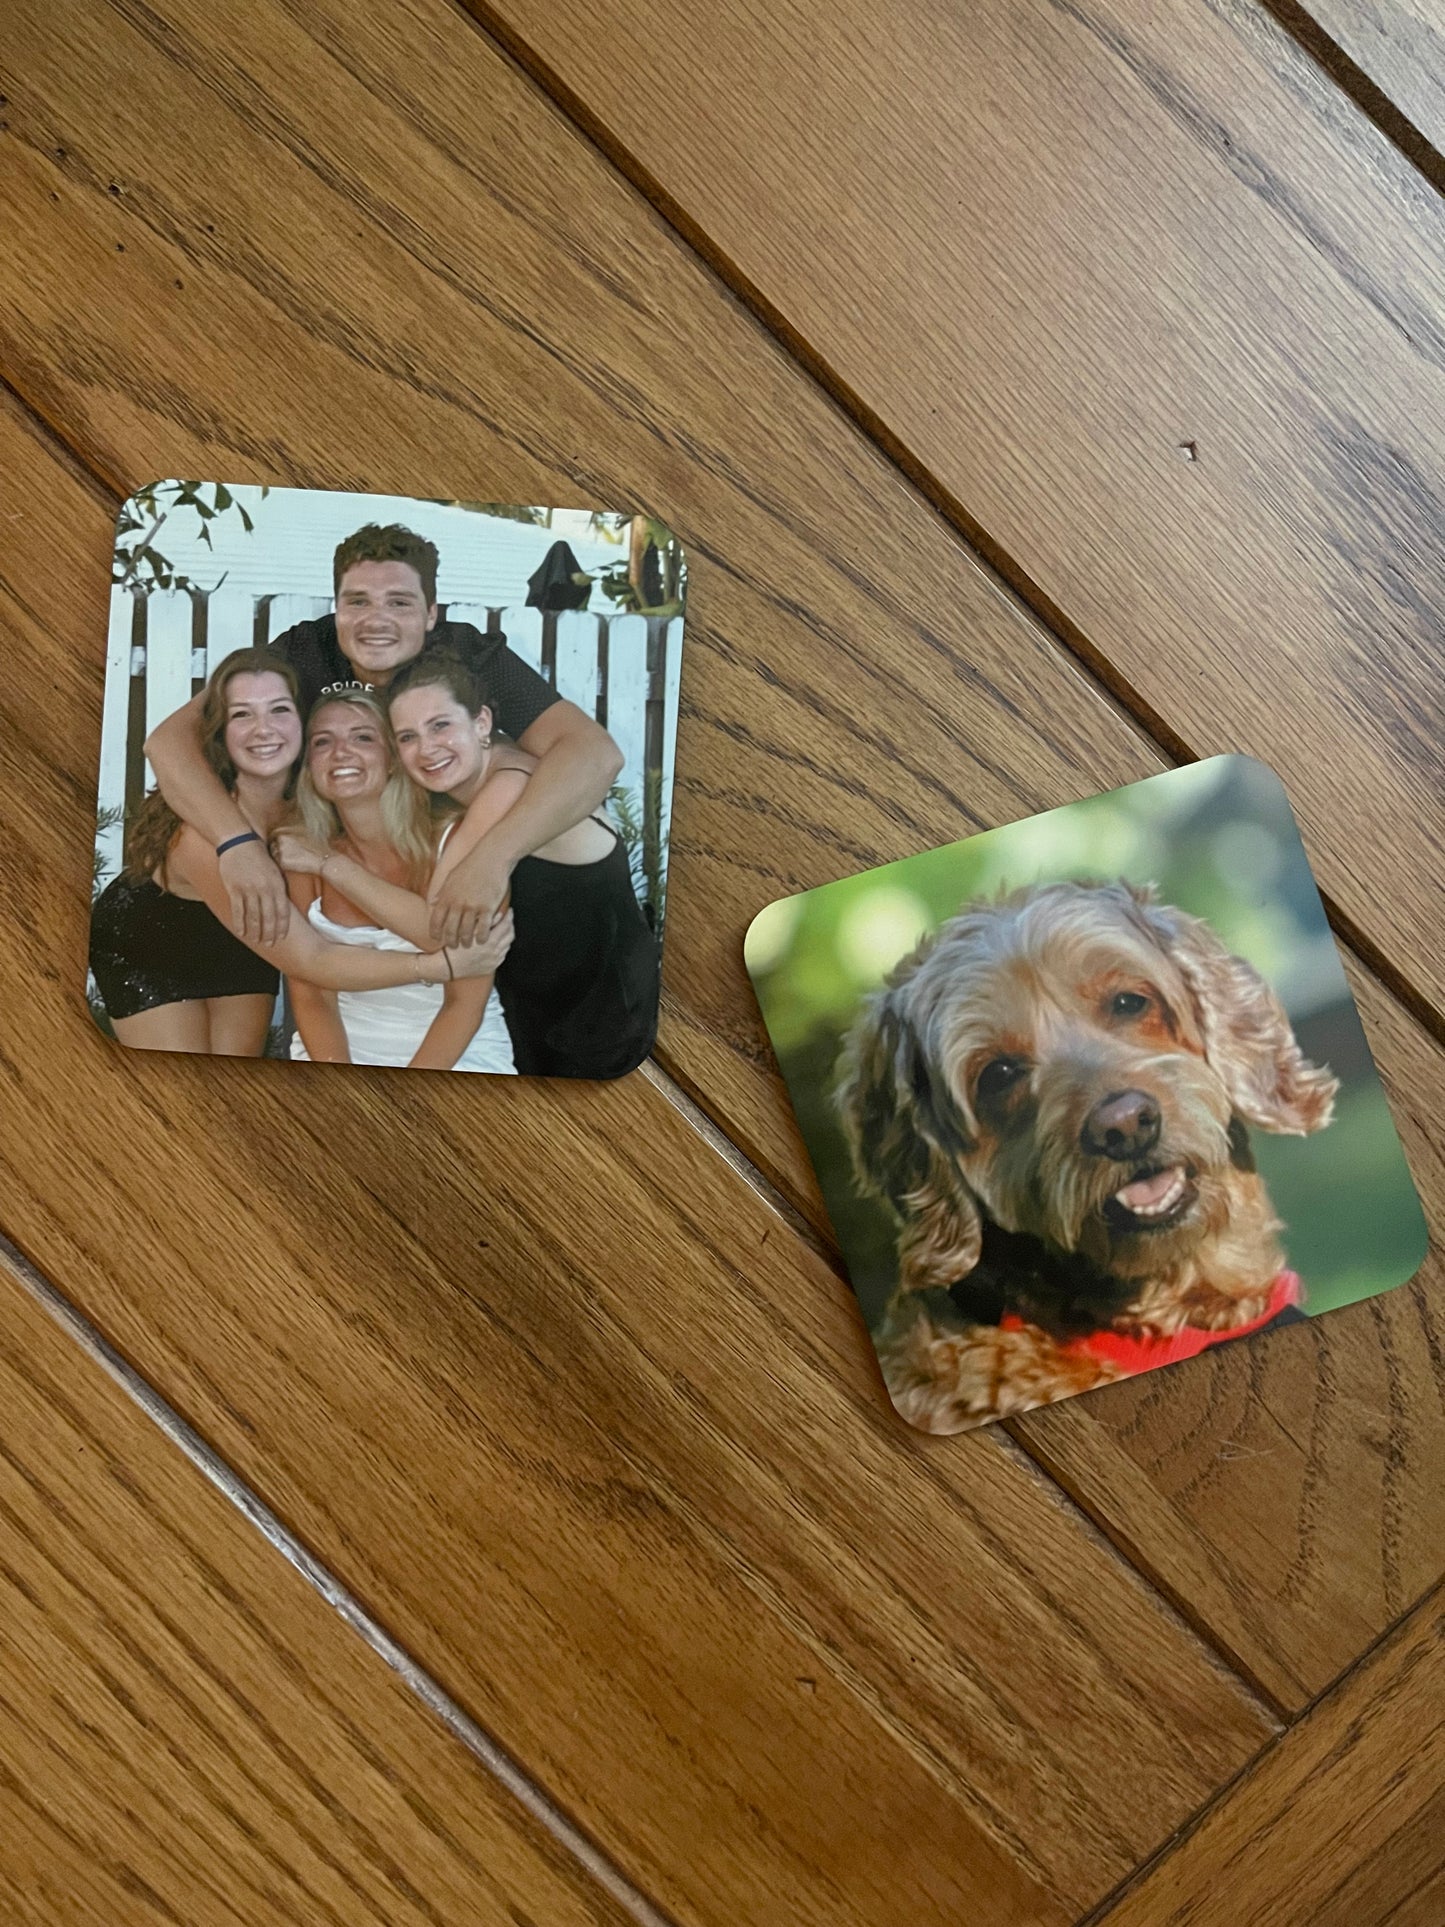 Coasters - 4" x 4" - Customize with a personal photo